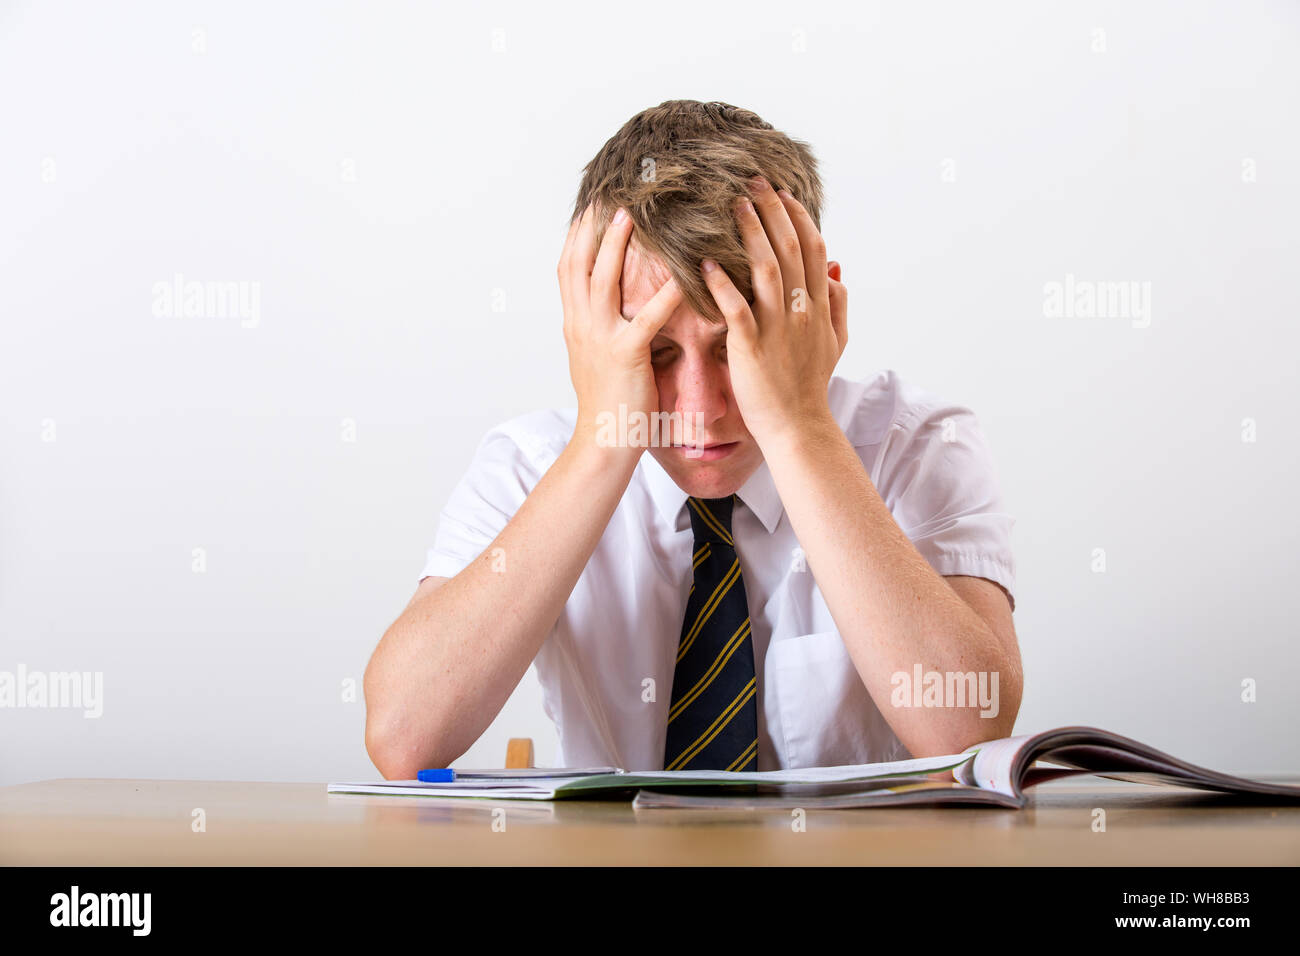 A stressed school pupil with his head in his hands sat at his desk Stock Photo